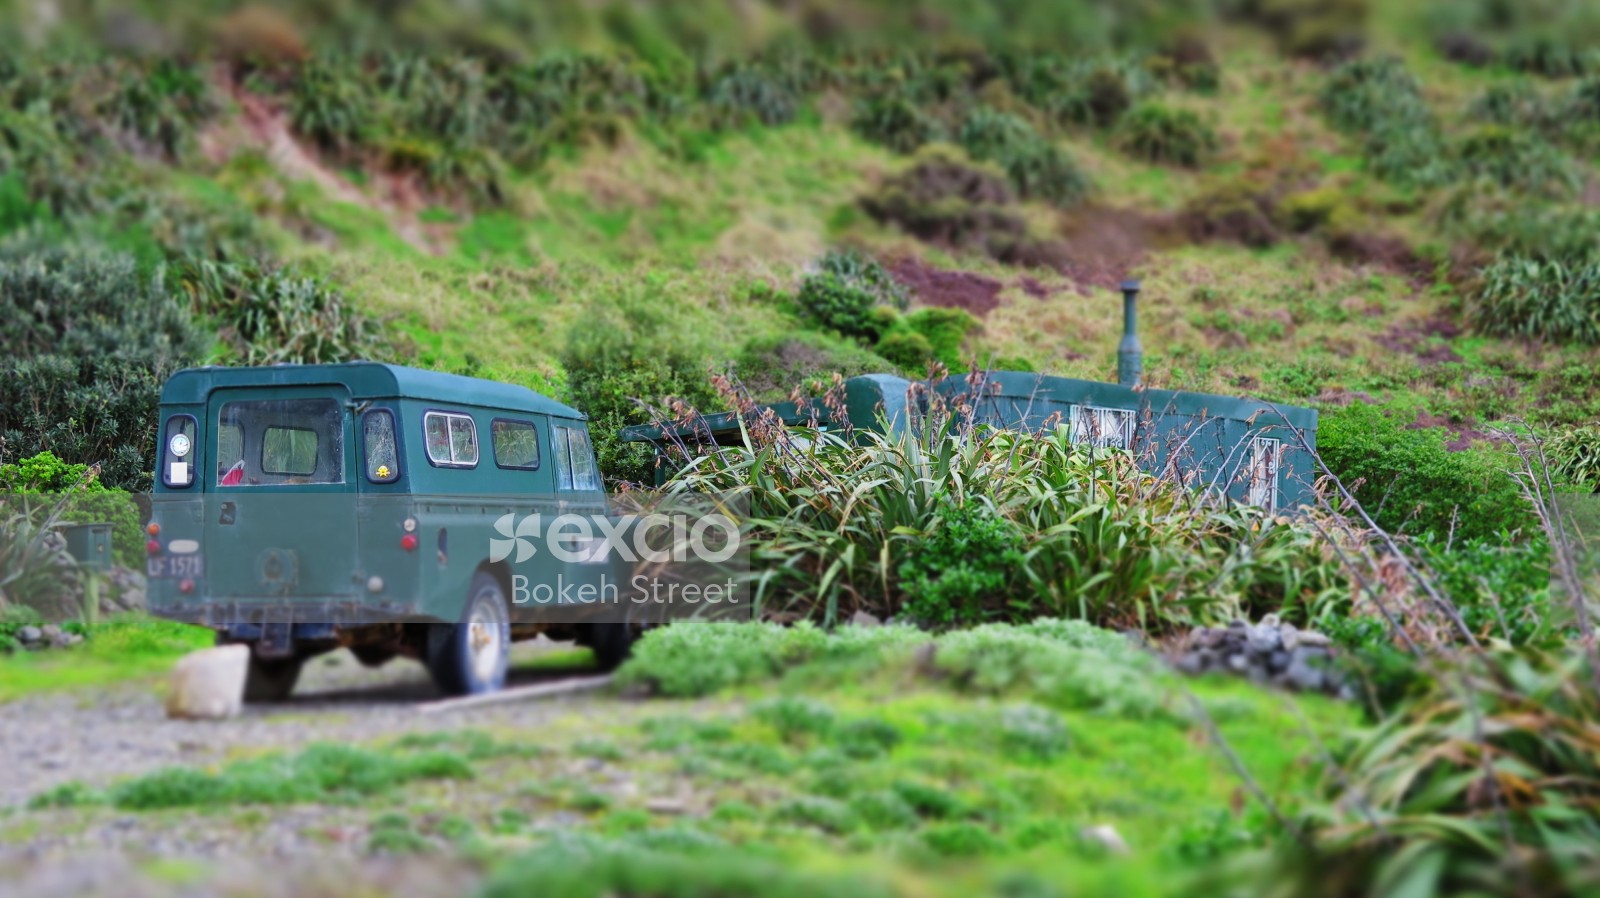 Teal Land rover Spodiopogon plant and a shack on Owhiro Bay